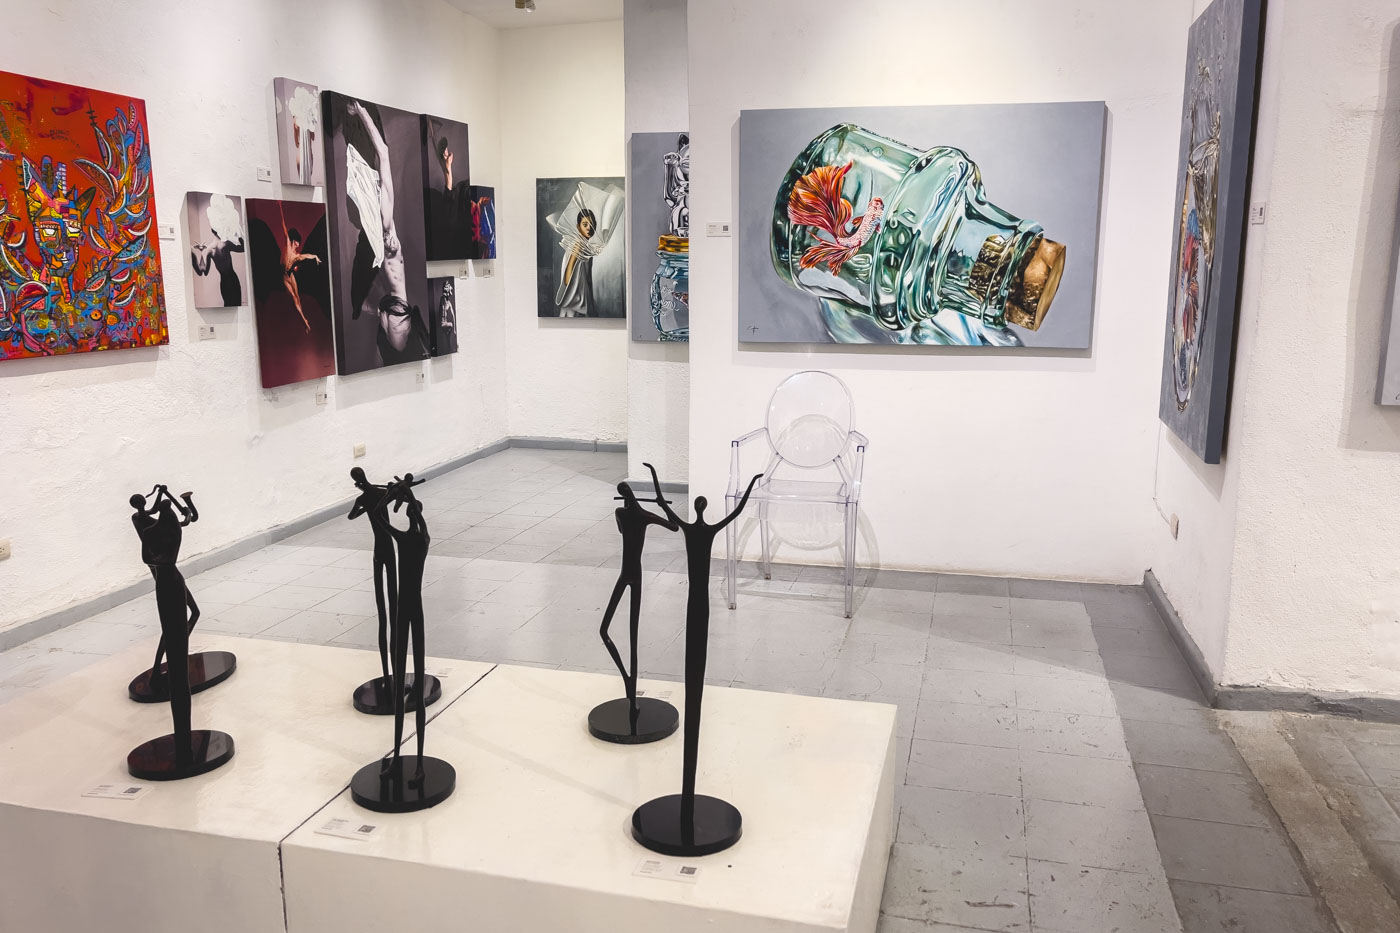 The inside of an art gallery with paintings on the walls and small sculptures on a pedestal.